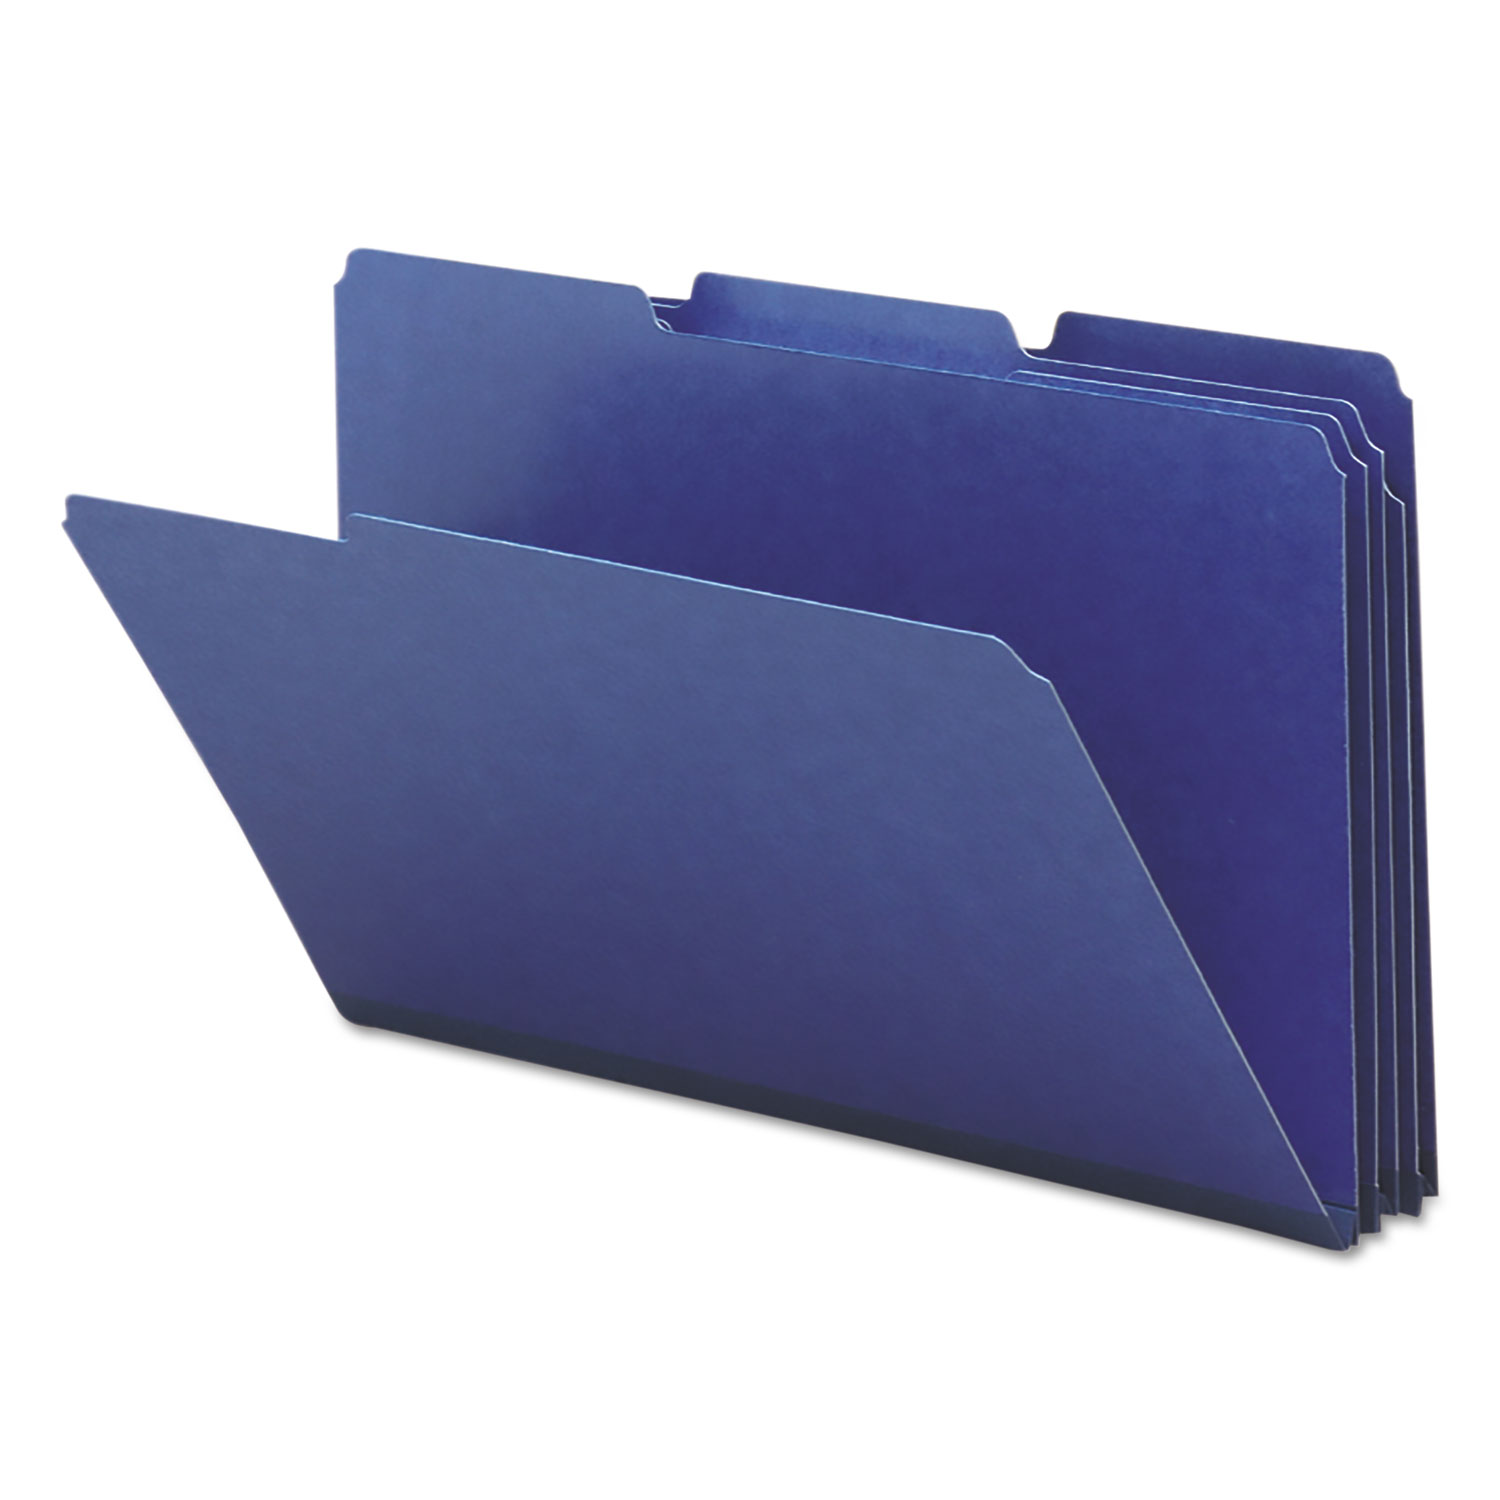  Smead 22541 Expanding Recycled Heavy Pressboard Folders, 1/3-Cut Tabs, 1 Expansion, Legal Size, Dark Blue, 25/Box (SMD22541) 